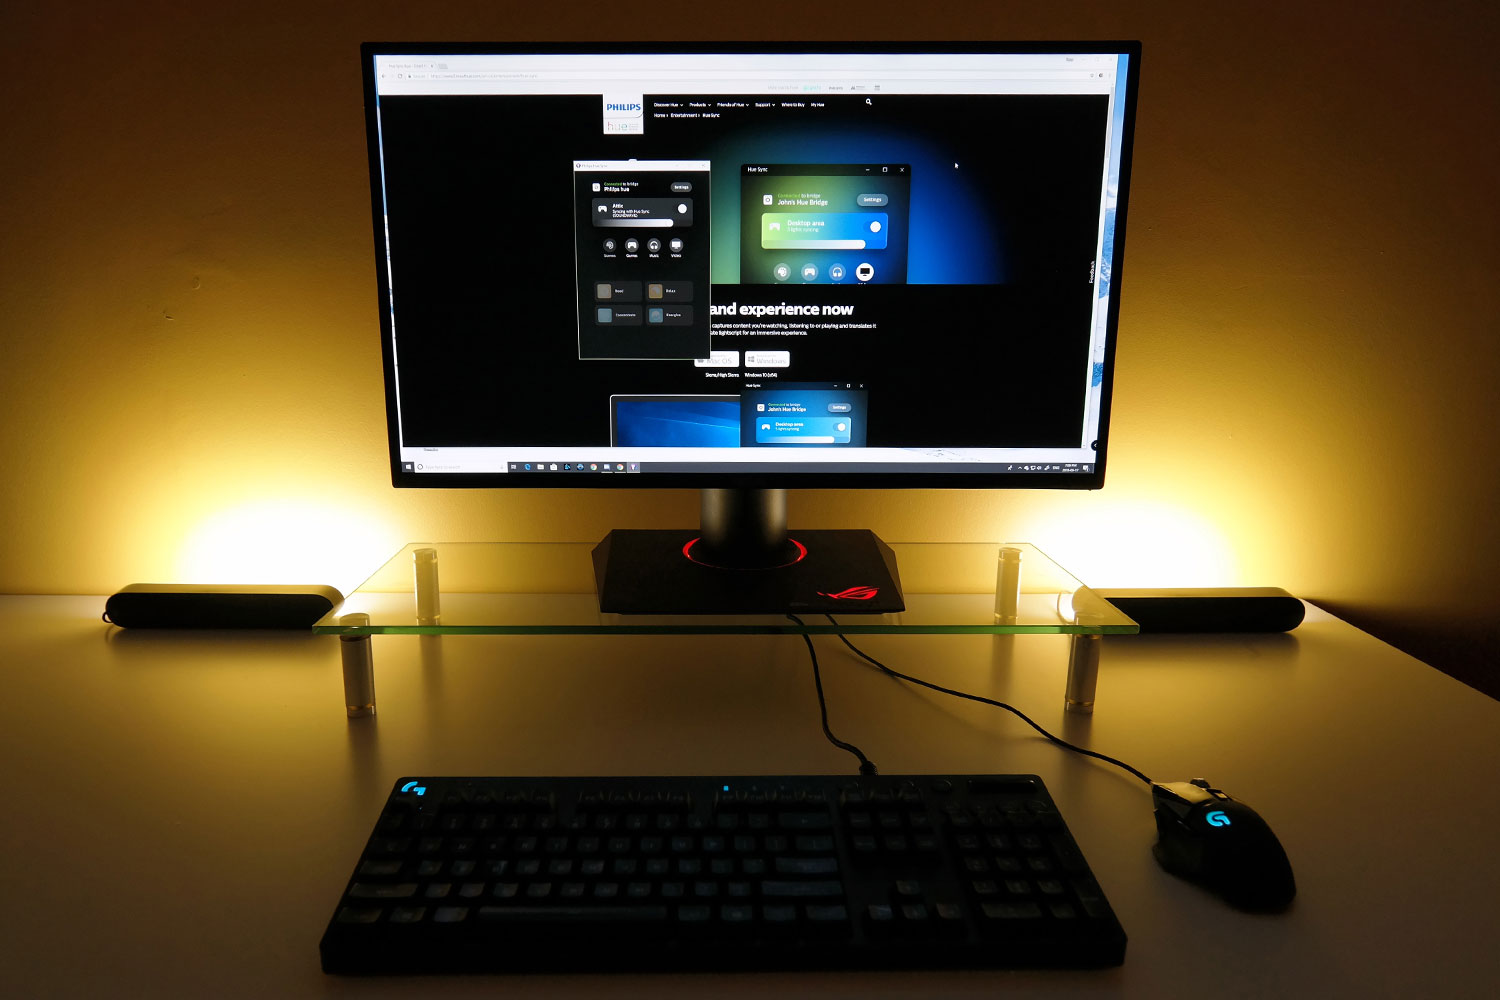 Philips Hue Play Light Bar review